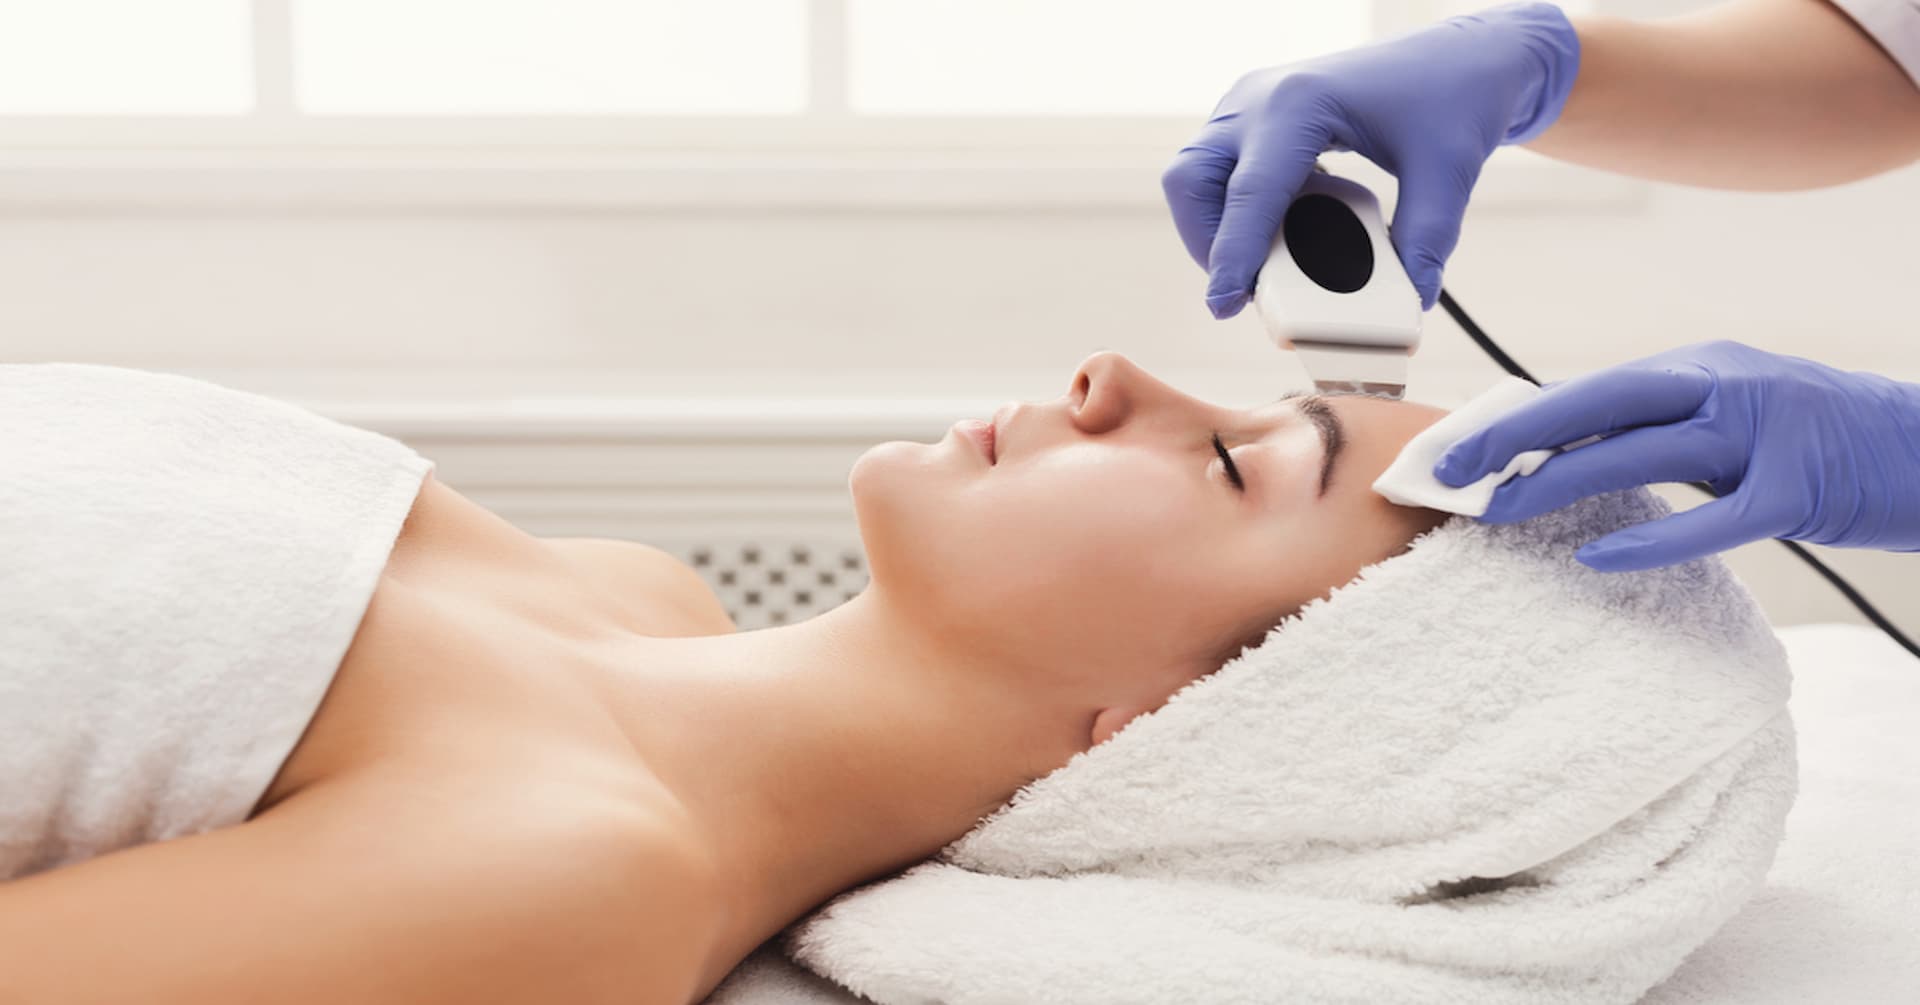 A woman receives a skin treatment from a professional at Arviv Medical Aesthetics Ocala, Florida location